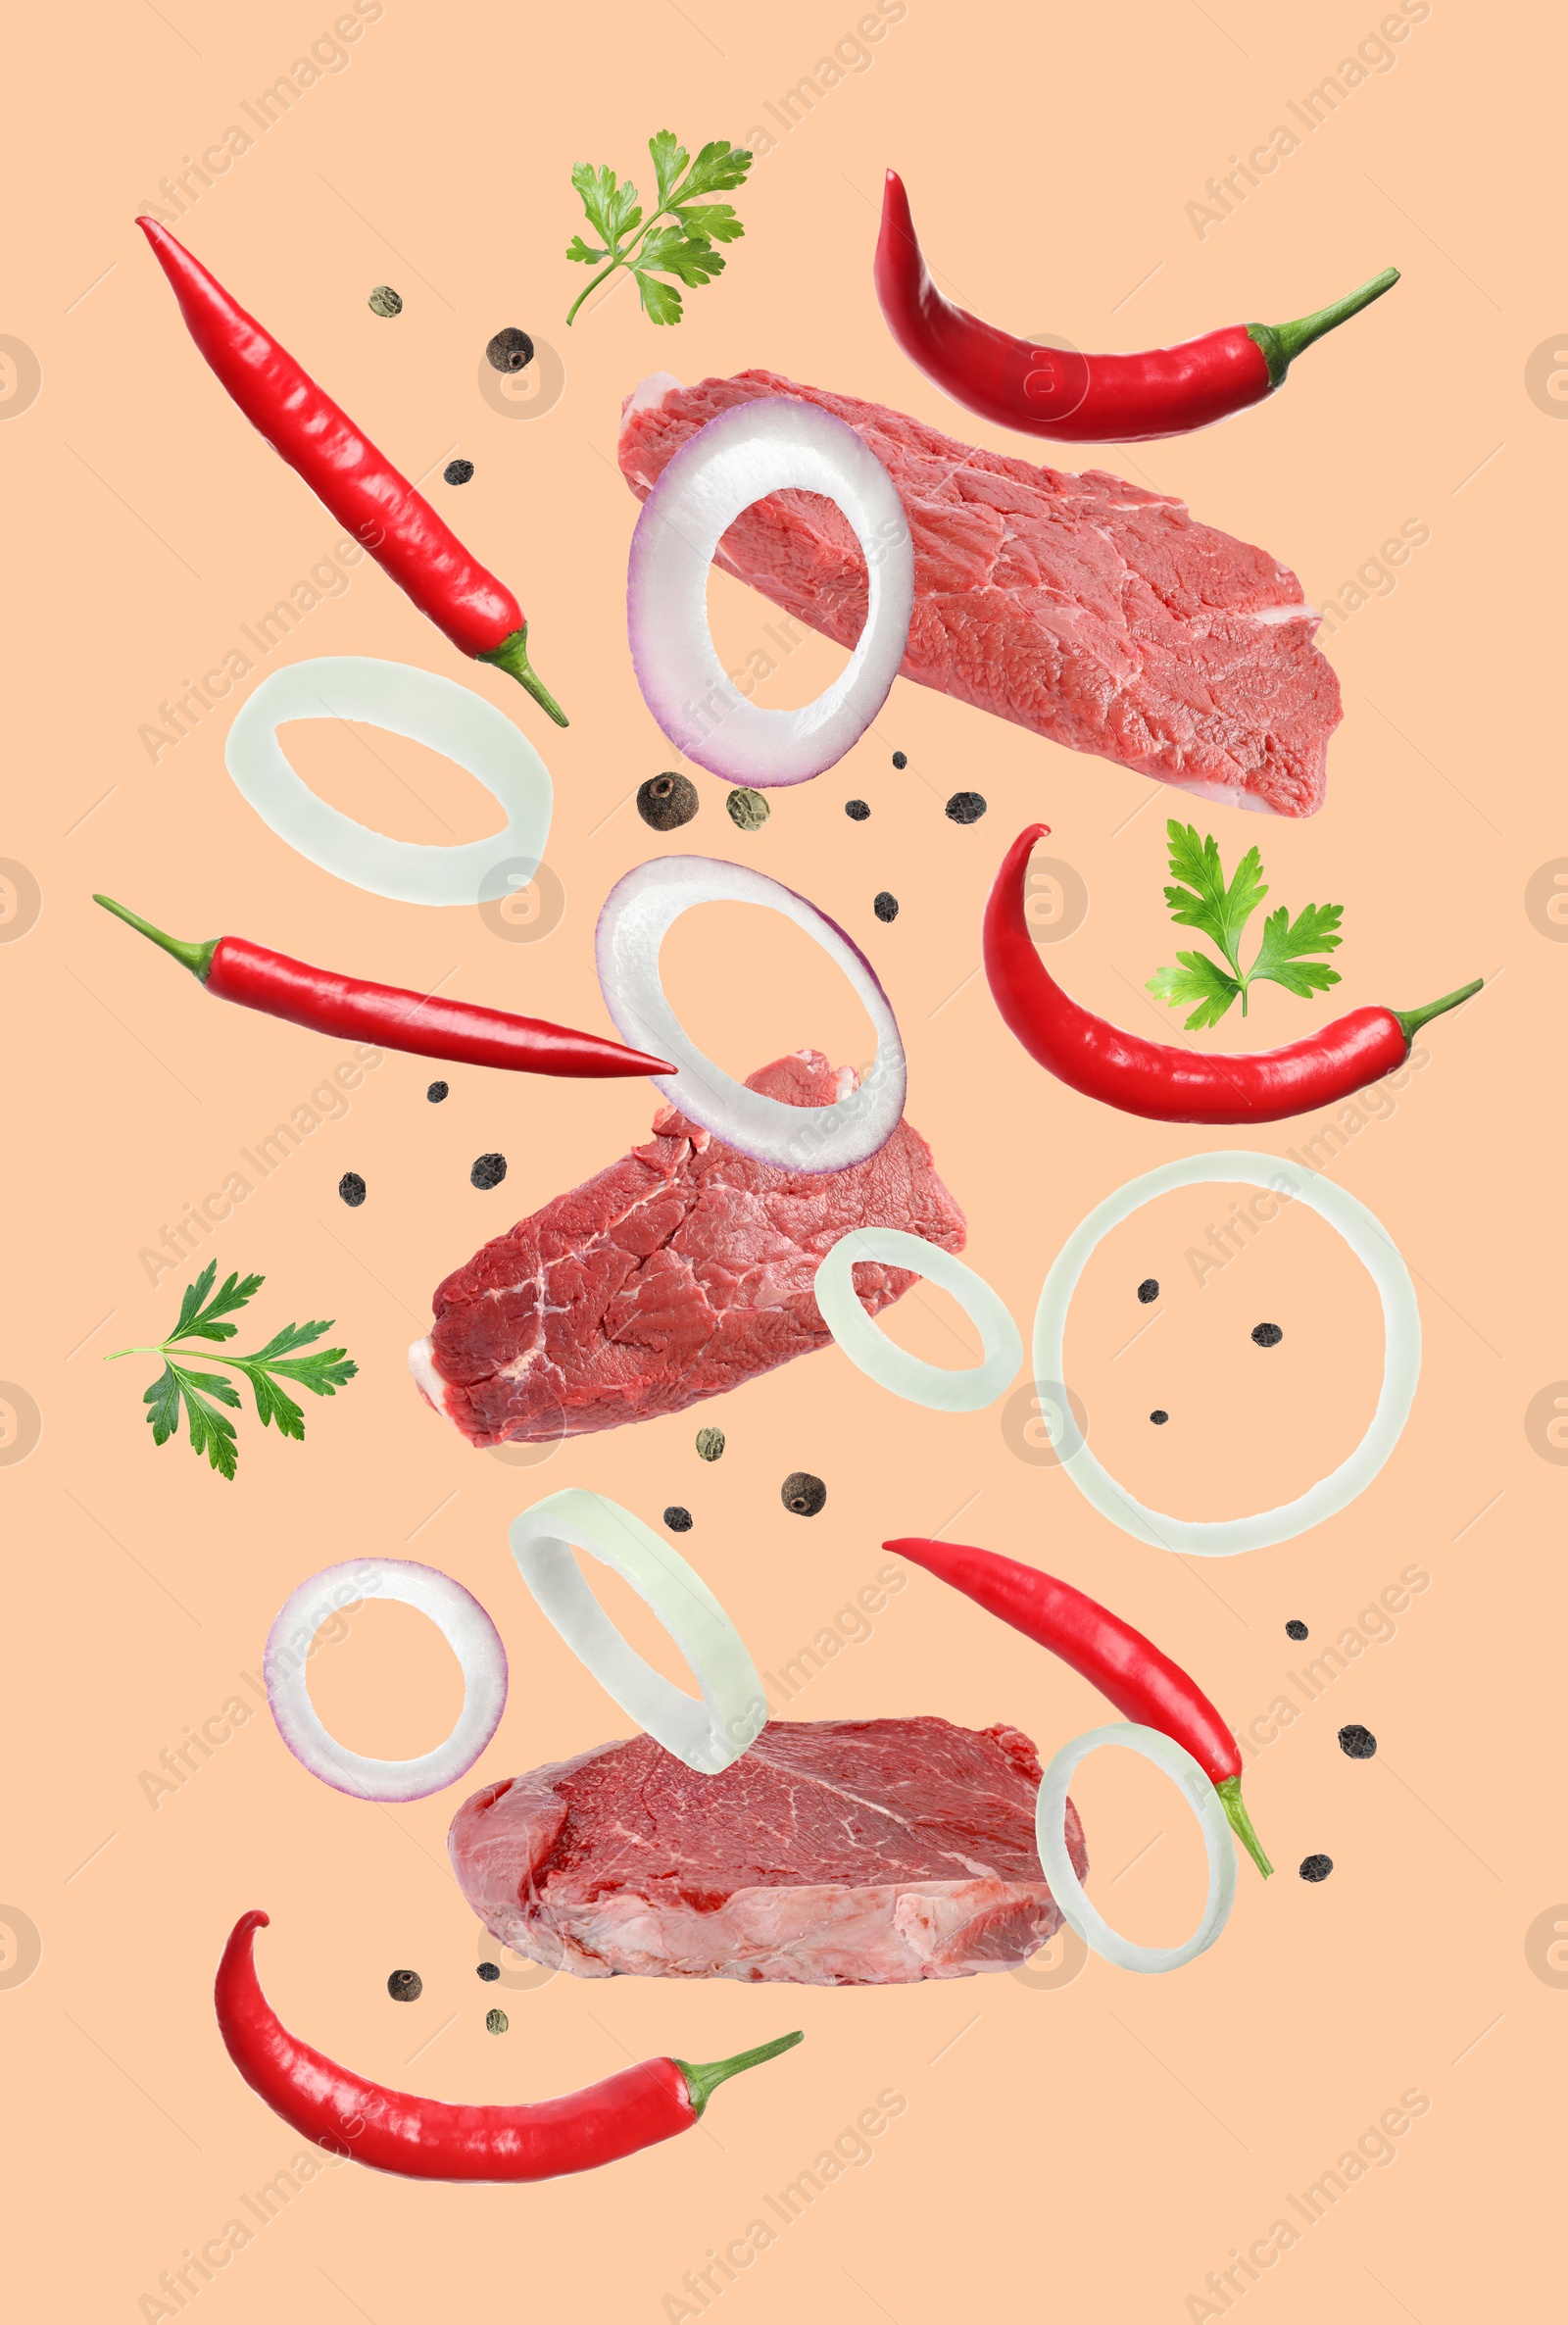 Image of Beef meat and different spices falling on beige background